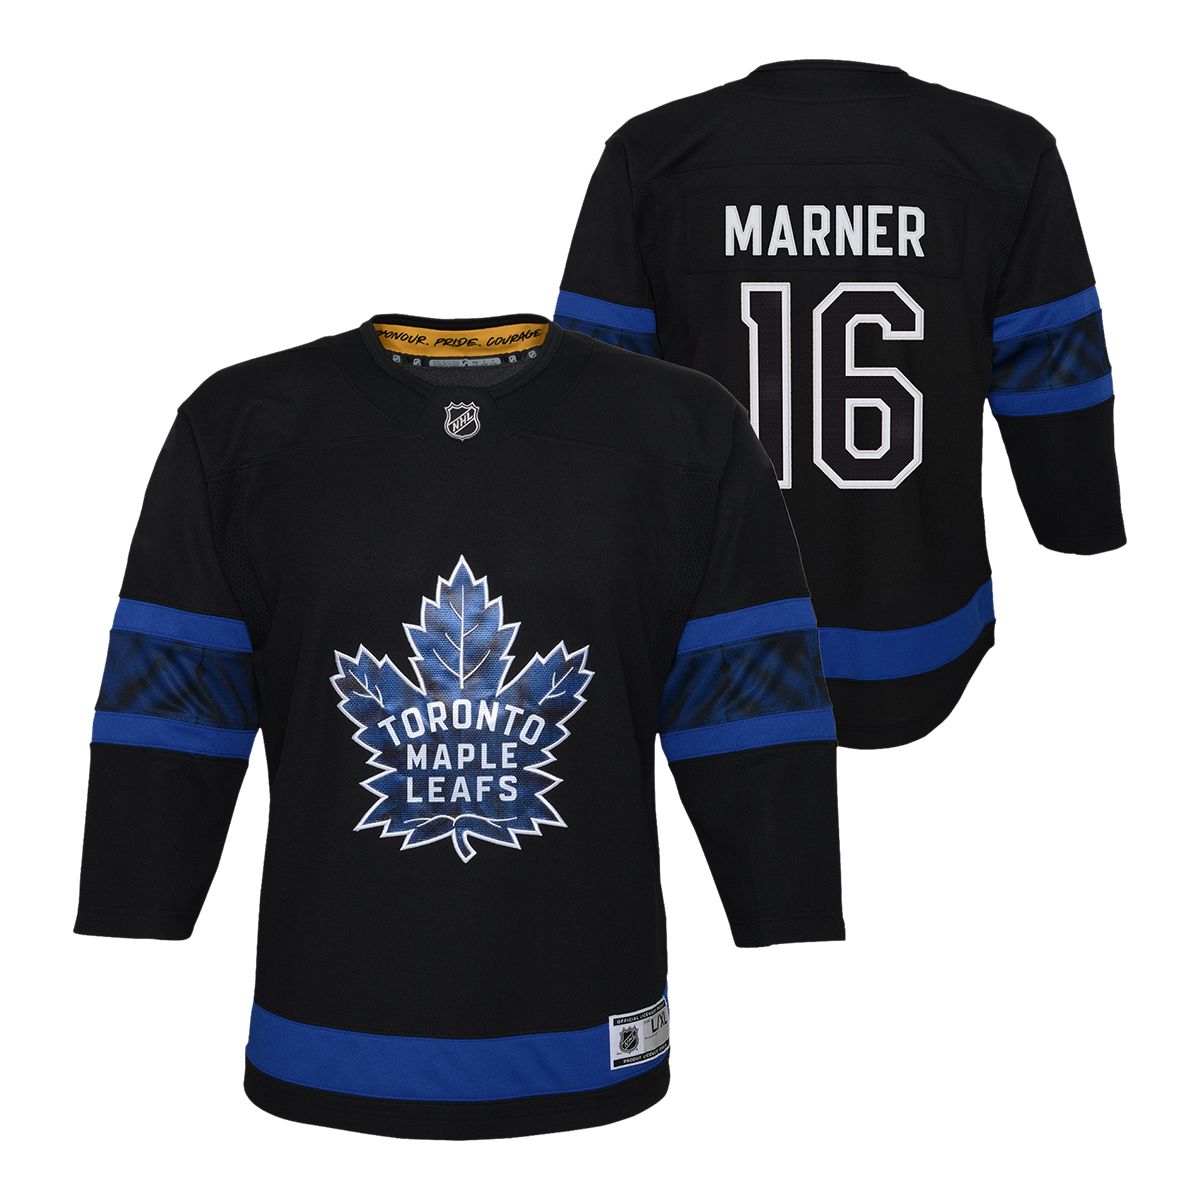  Toronto Maple Leafs Toddler Premier Home Jersey - Size 2T/4T  Blue : Sports & Outdoors